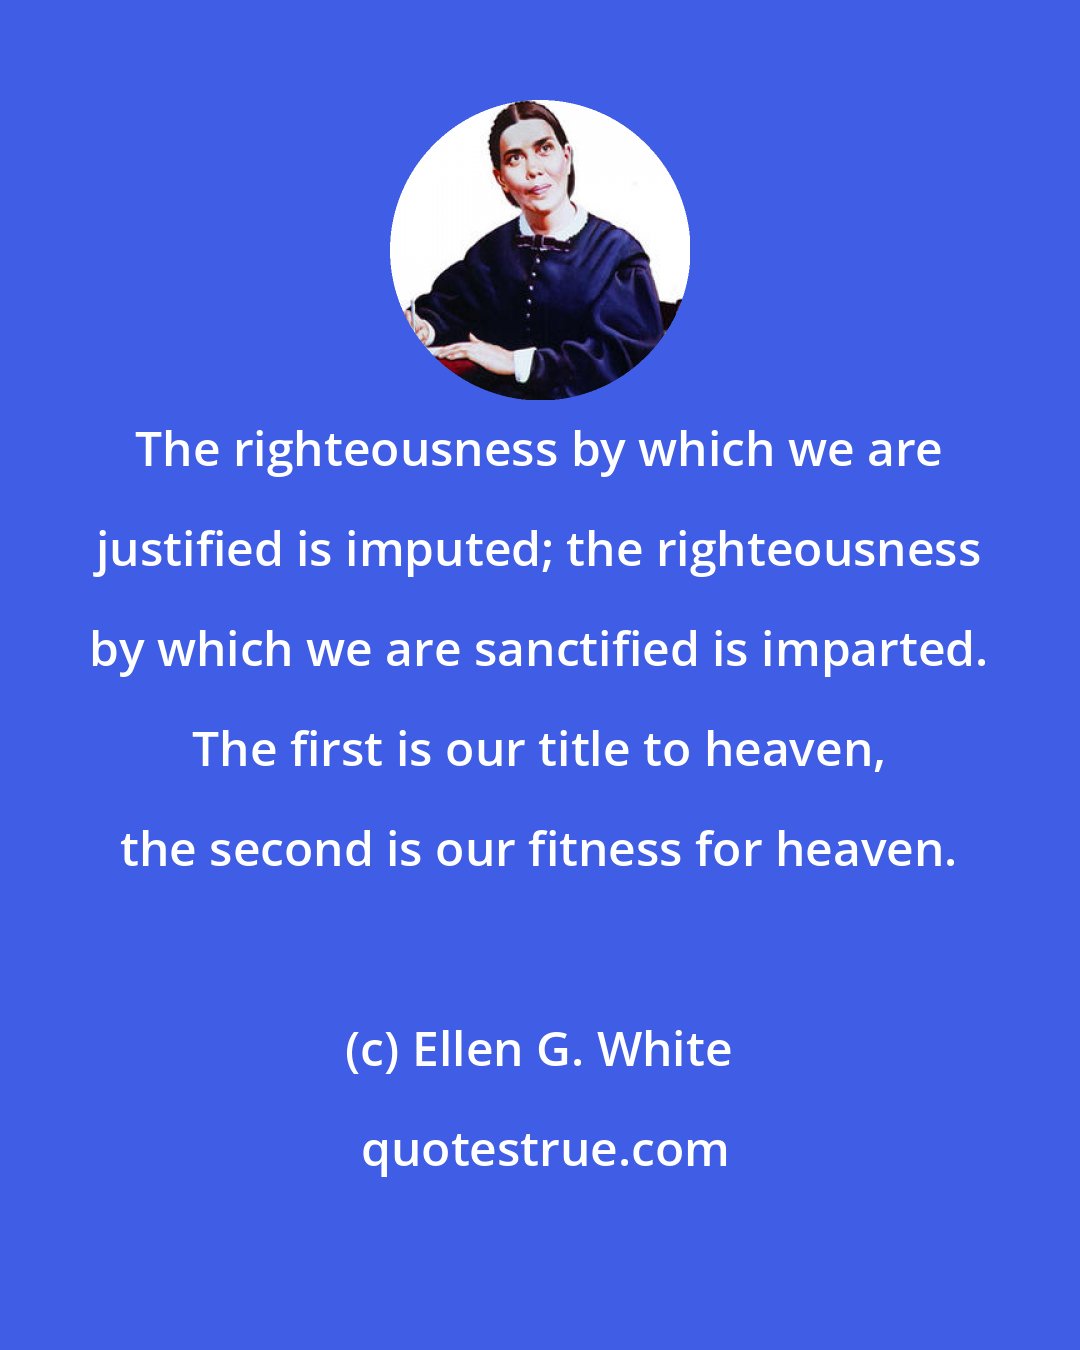 Ellen G. White: The righteousness by which we are justified is imputed; the righteousness by which we are sanctified is imparted. The first is our title to heaven, the second is our fitness for heaven.